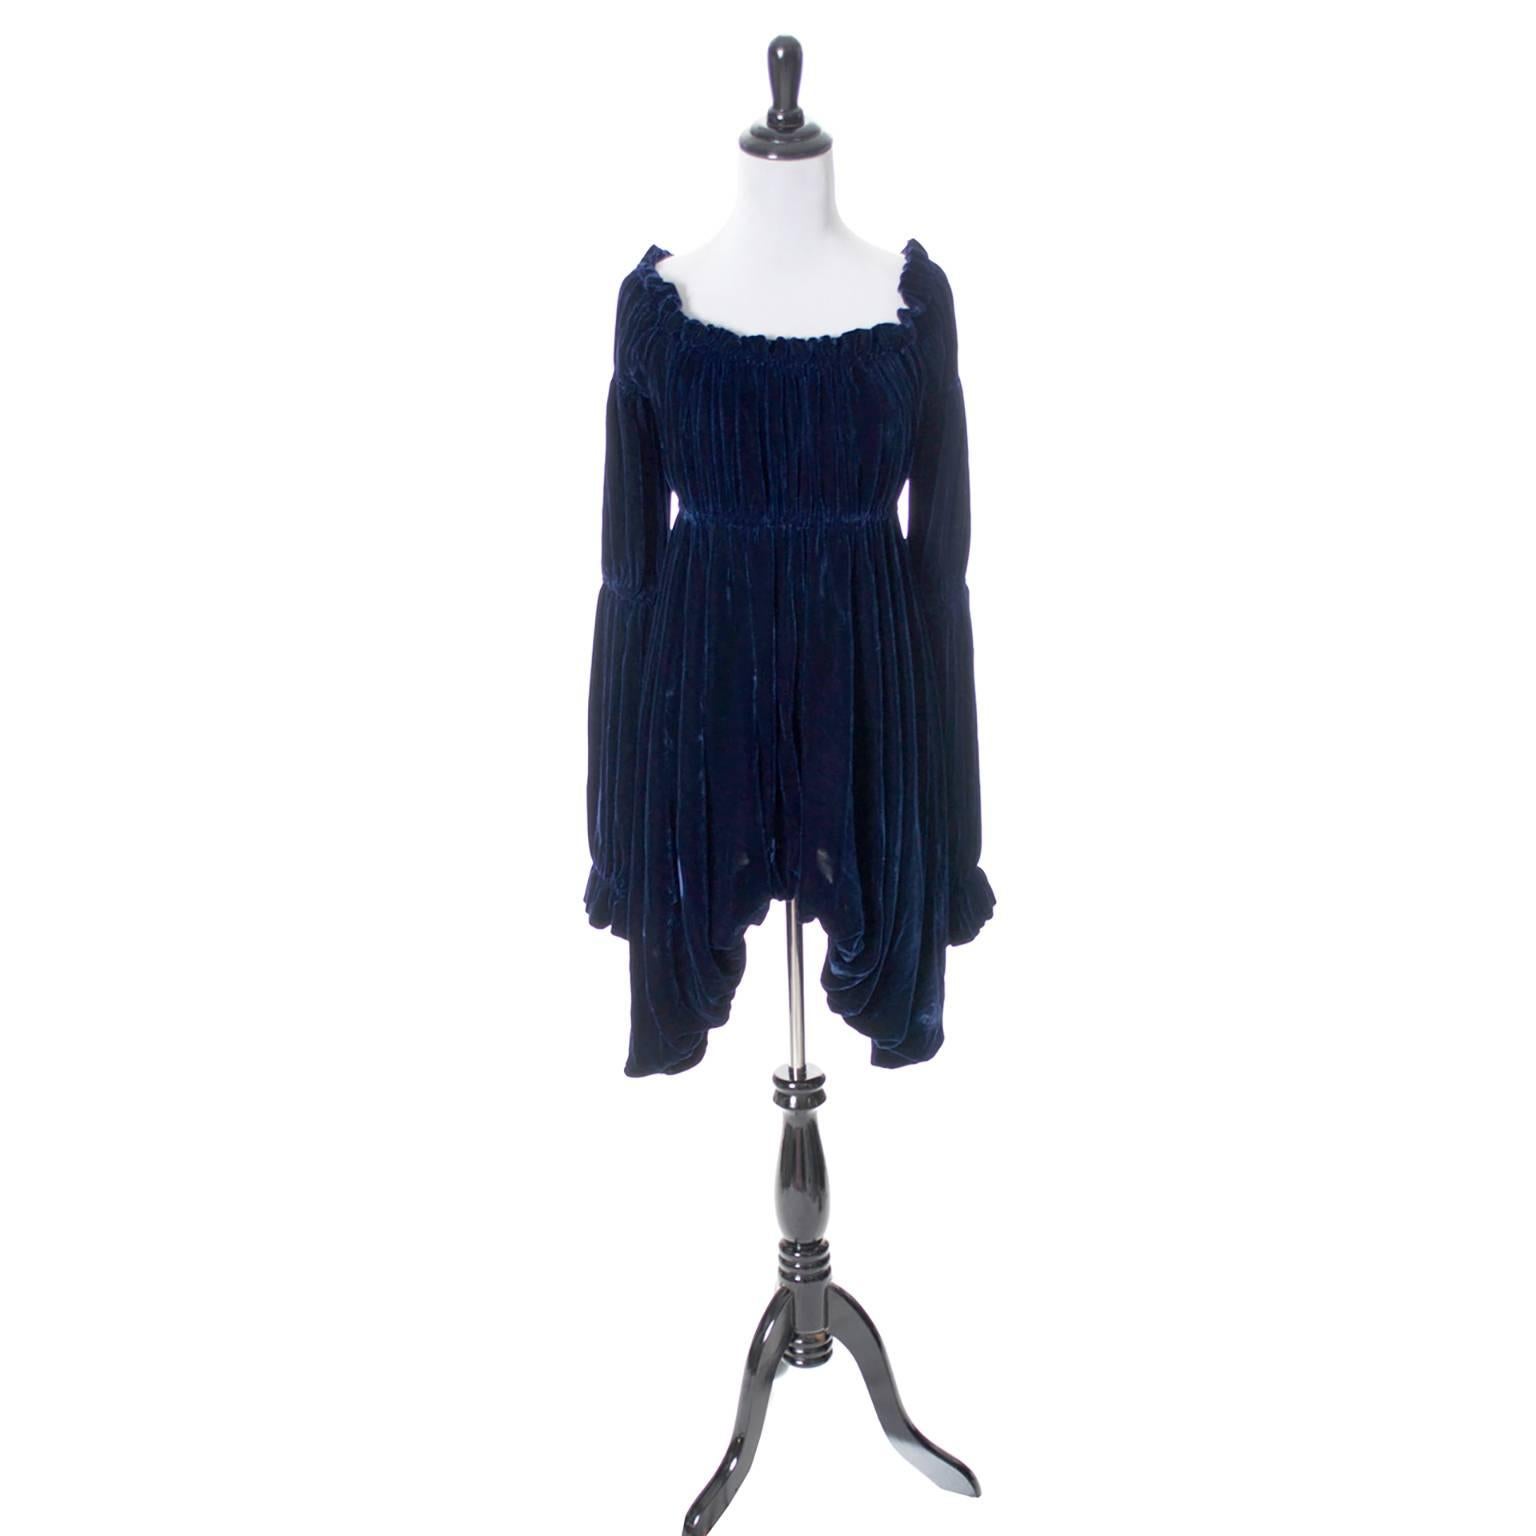 This is an extraordinary 1980's vintage dress from Norma Kamali. This avant garde rayon and silk vintage midnight blue velvet dress has a lined skirt portion and elastic gathering at the empire waist line. I particularly love the Elizabethan poet